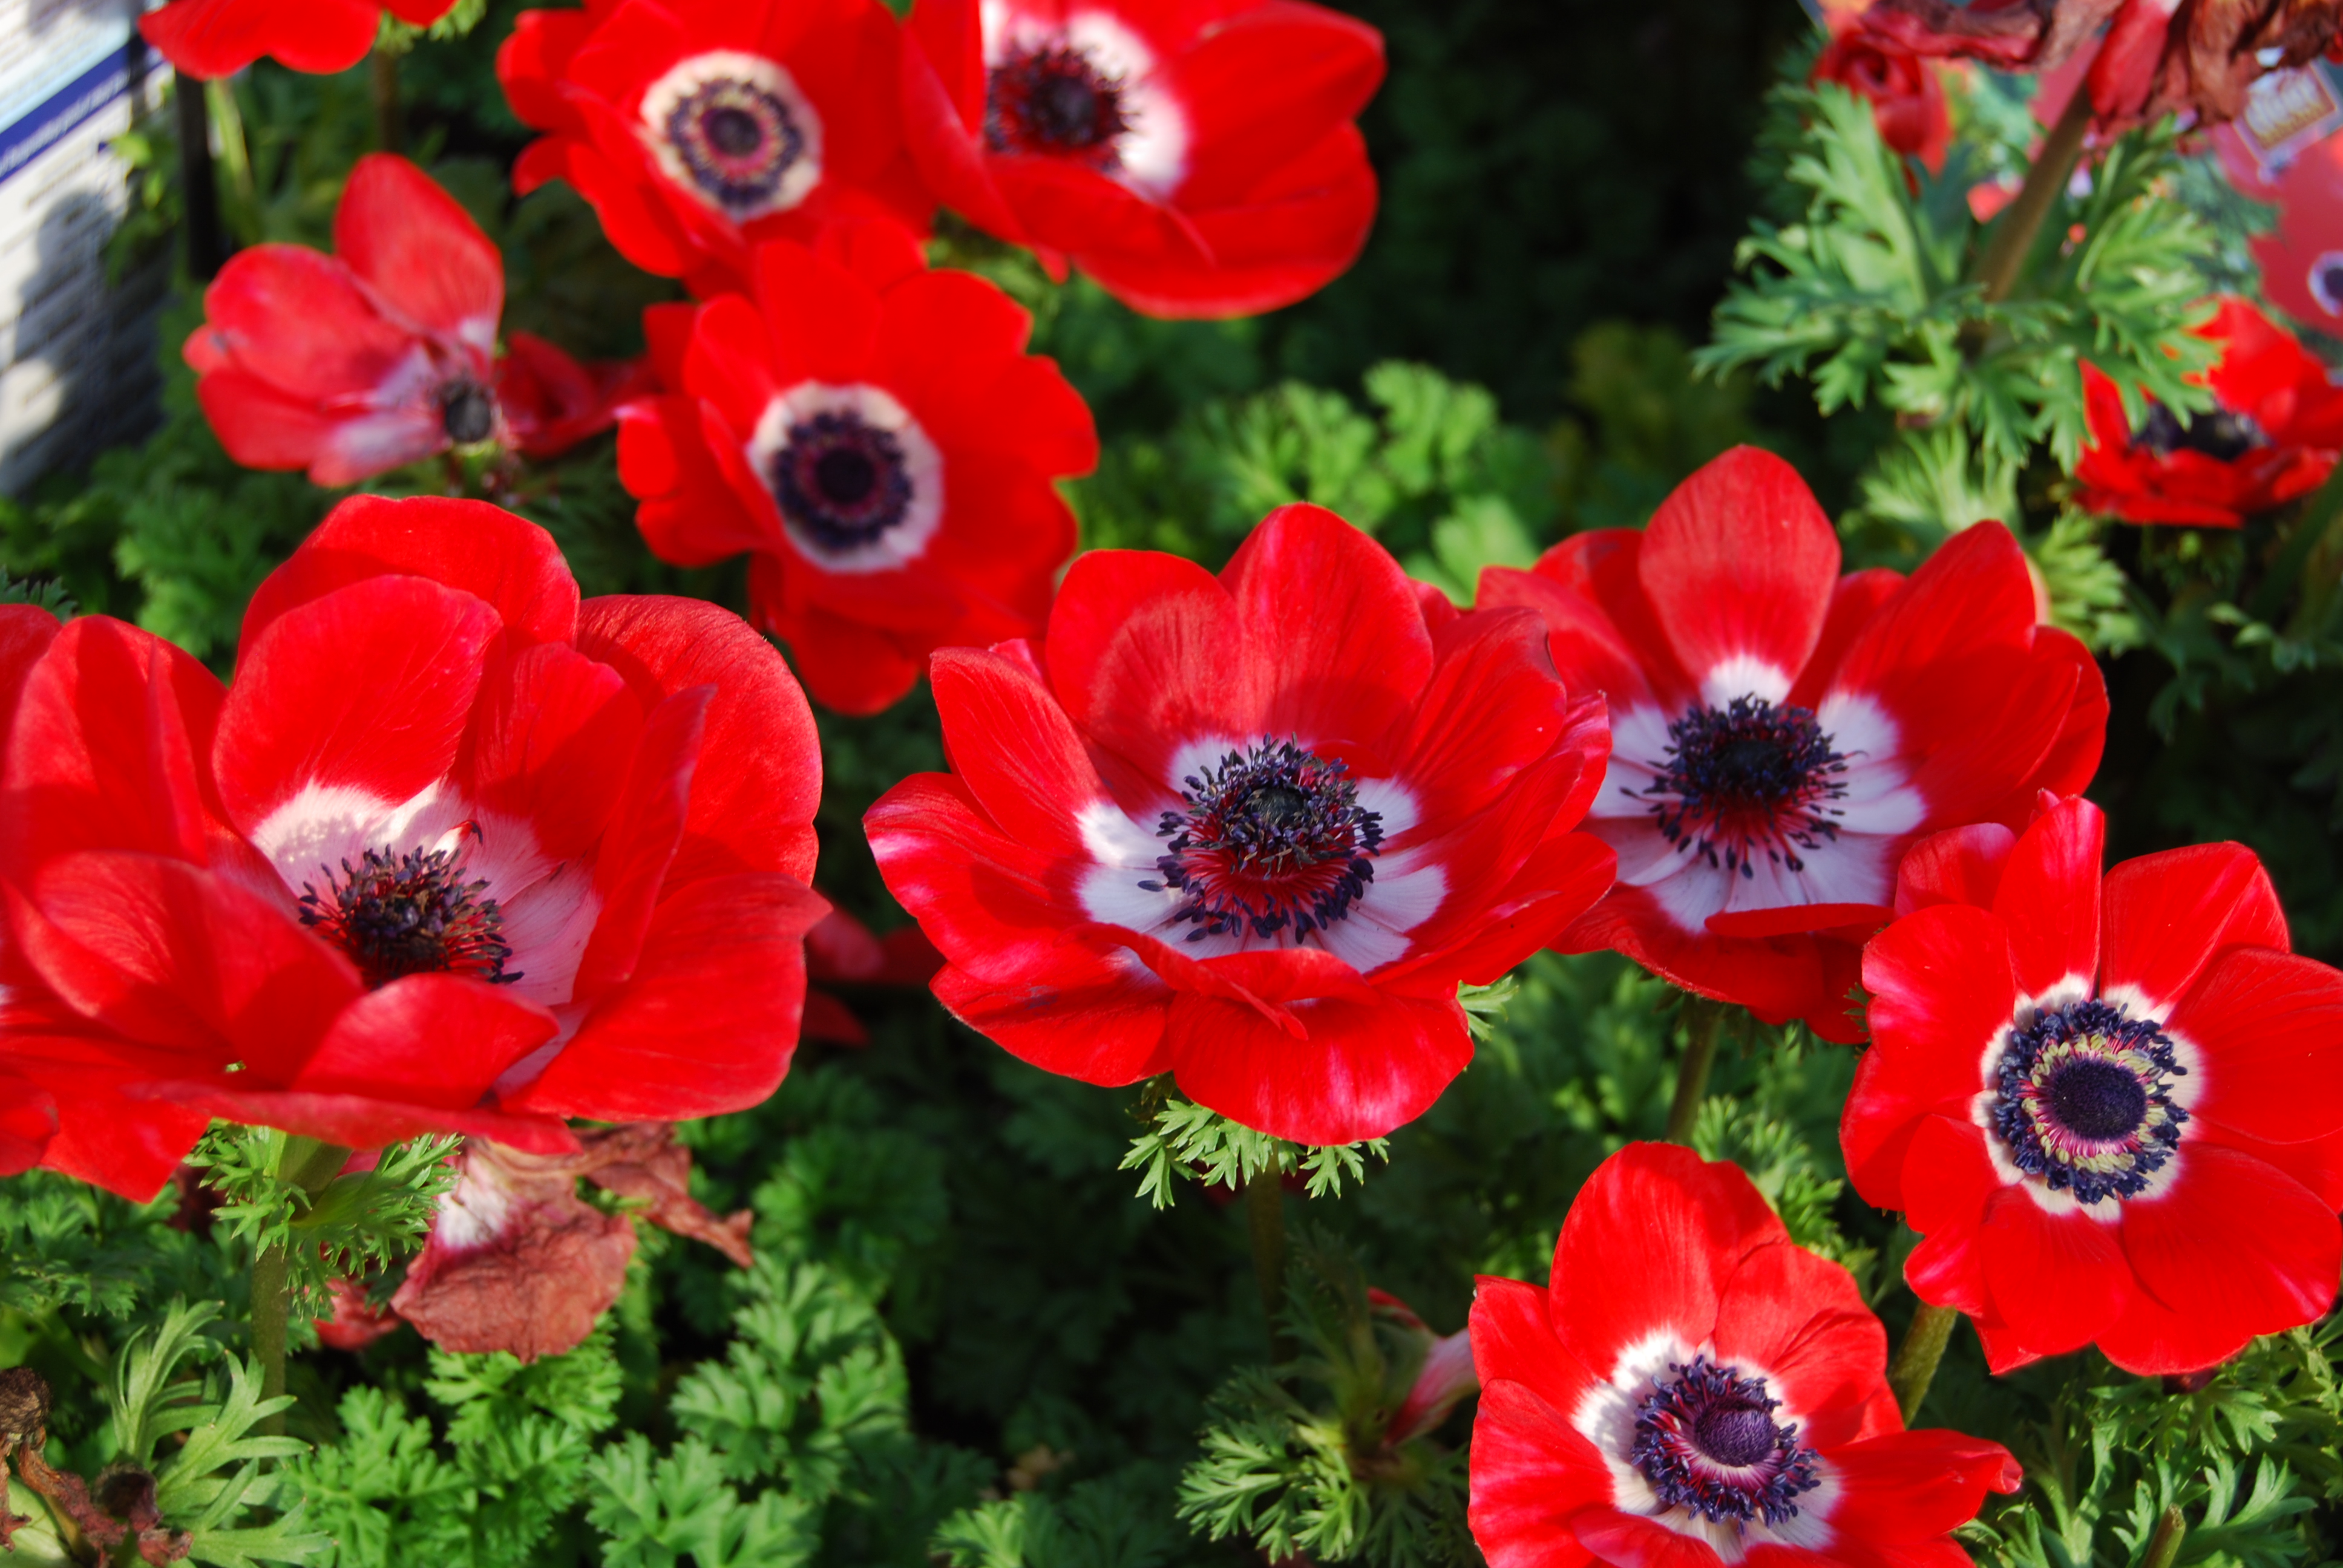 earth, anemone, close up, flower, nature, red flower, flowers